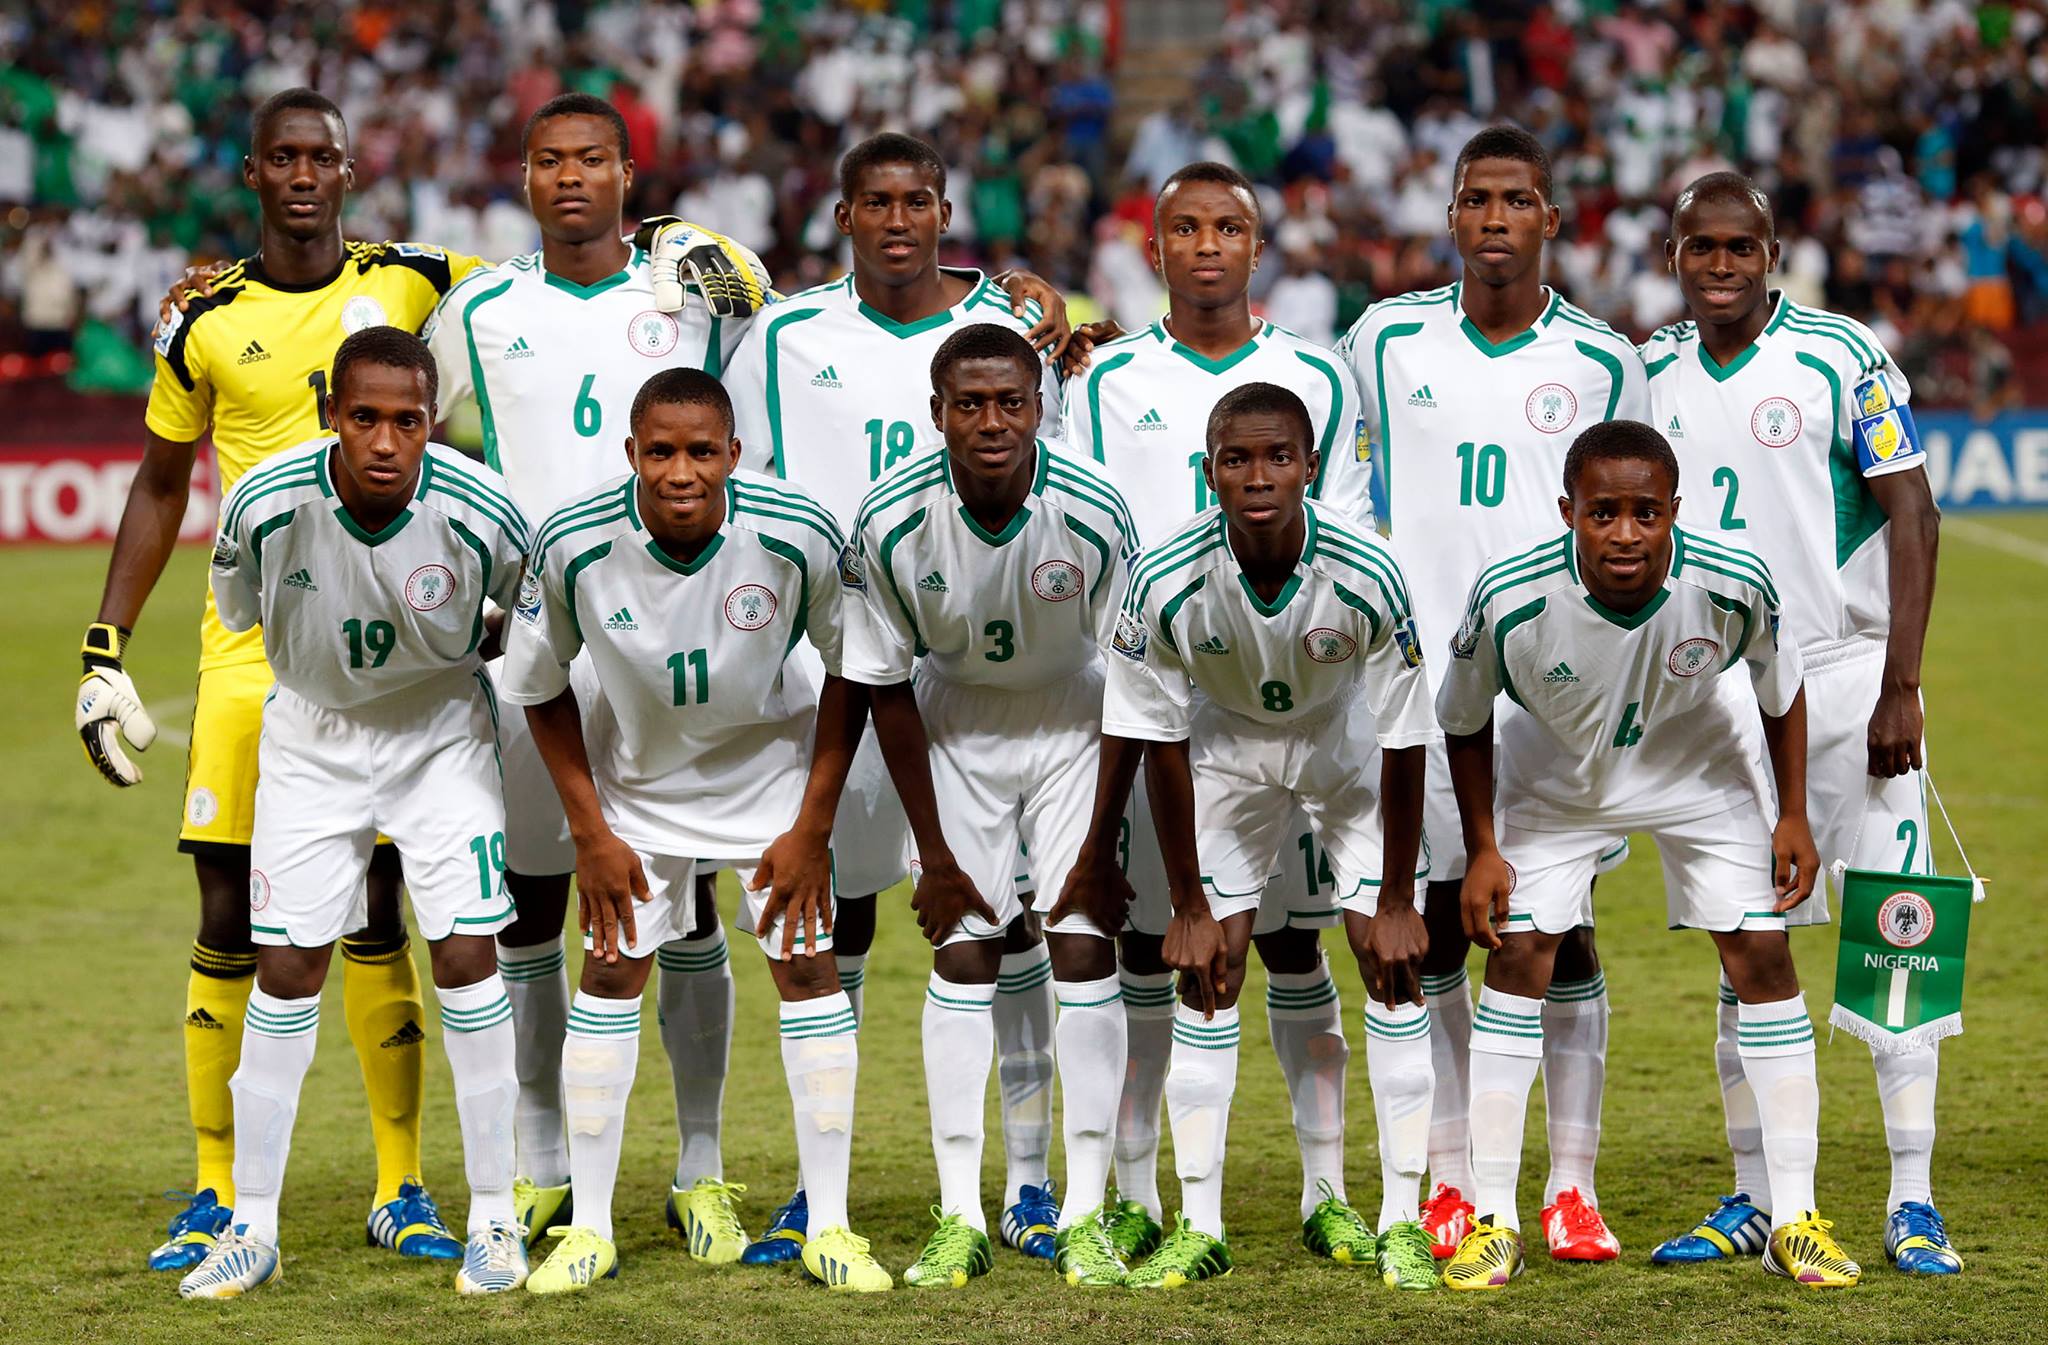 Hope and despair: The repeated cycle of Nigerian football youth